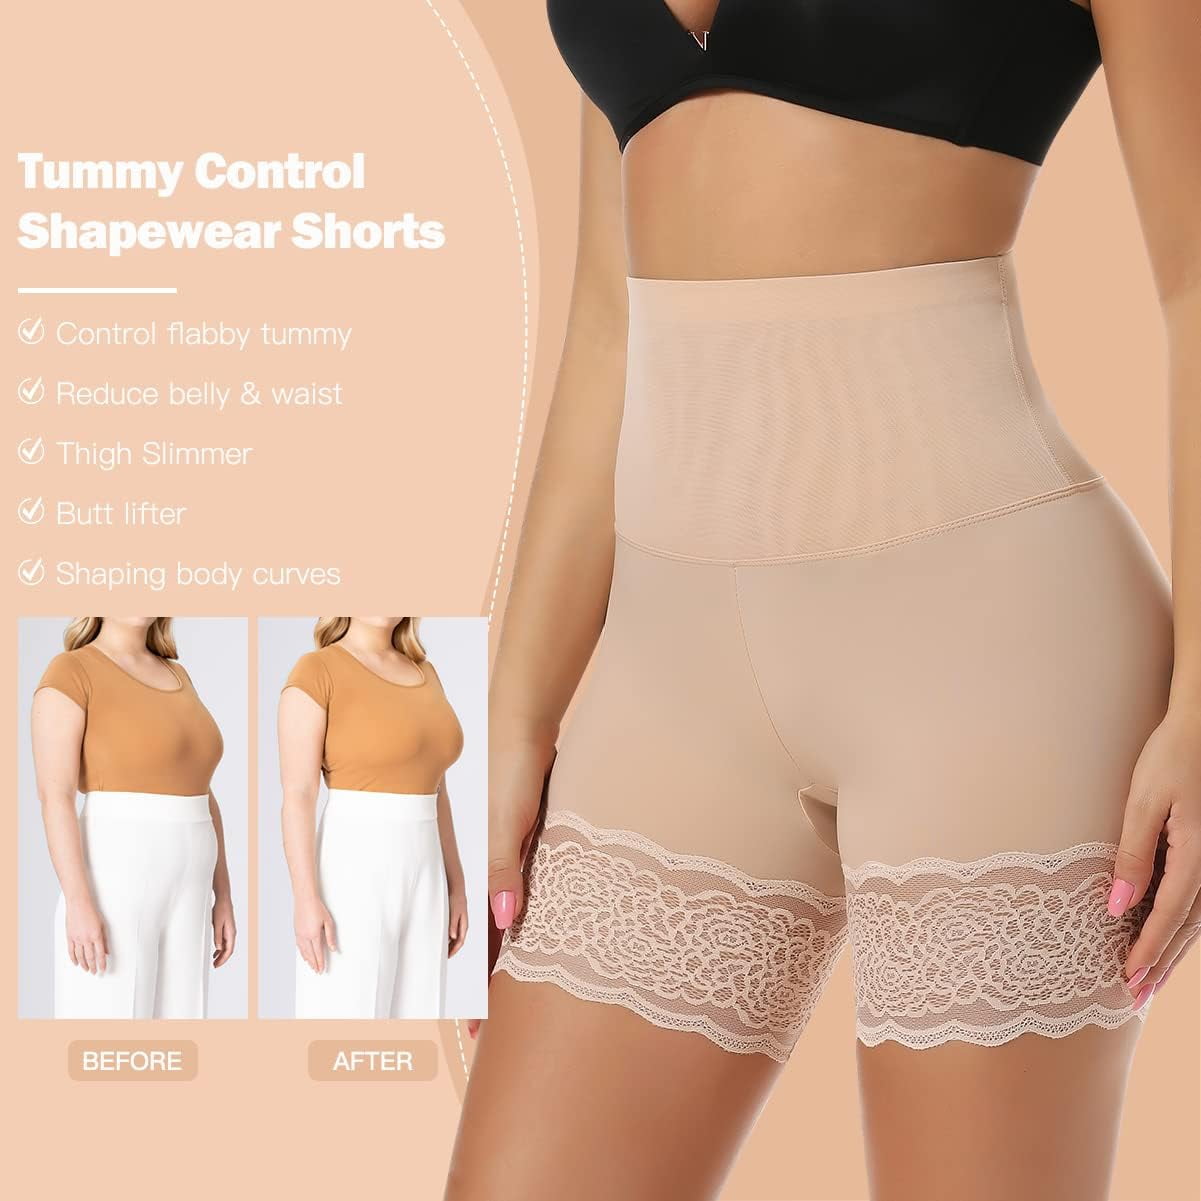 Hot Women's Shaper Shapermint Slim Body Control Slim High Waist Solid  Breathable Tummy Comfortable Exotic Shorts Pants Underwear - Shapers -  AliExpress